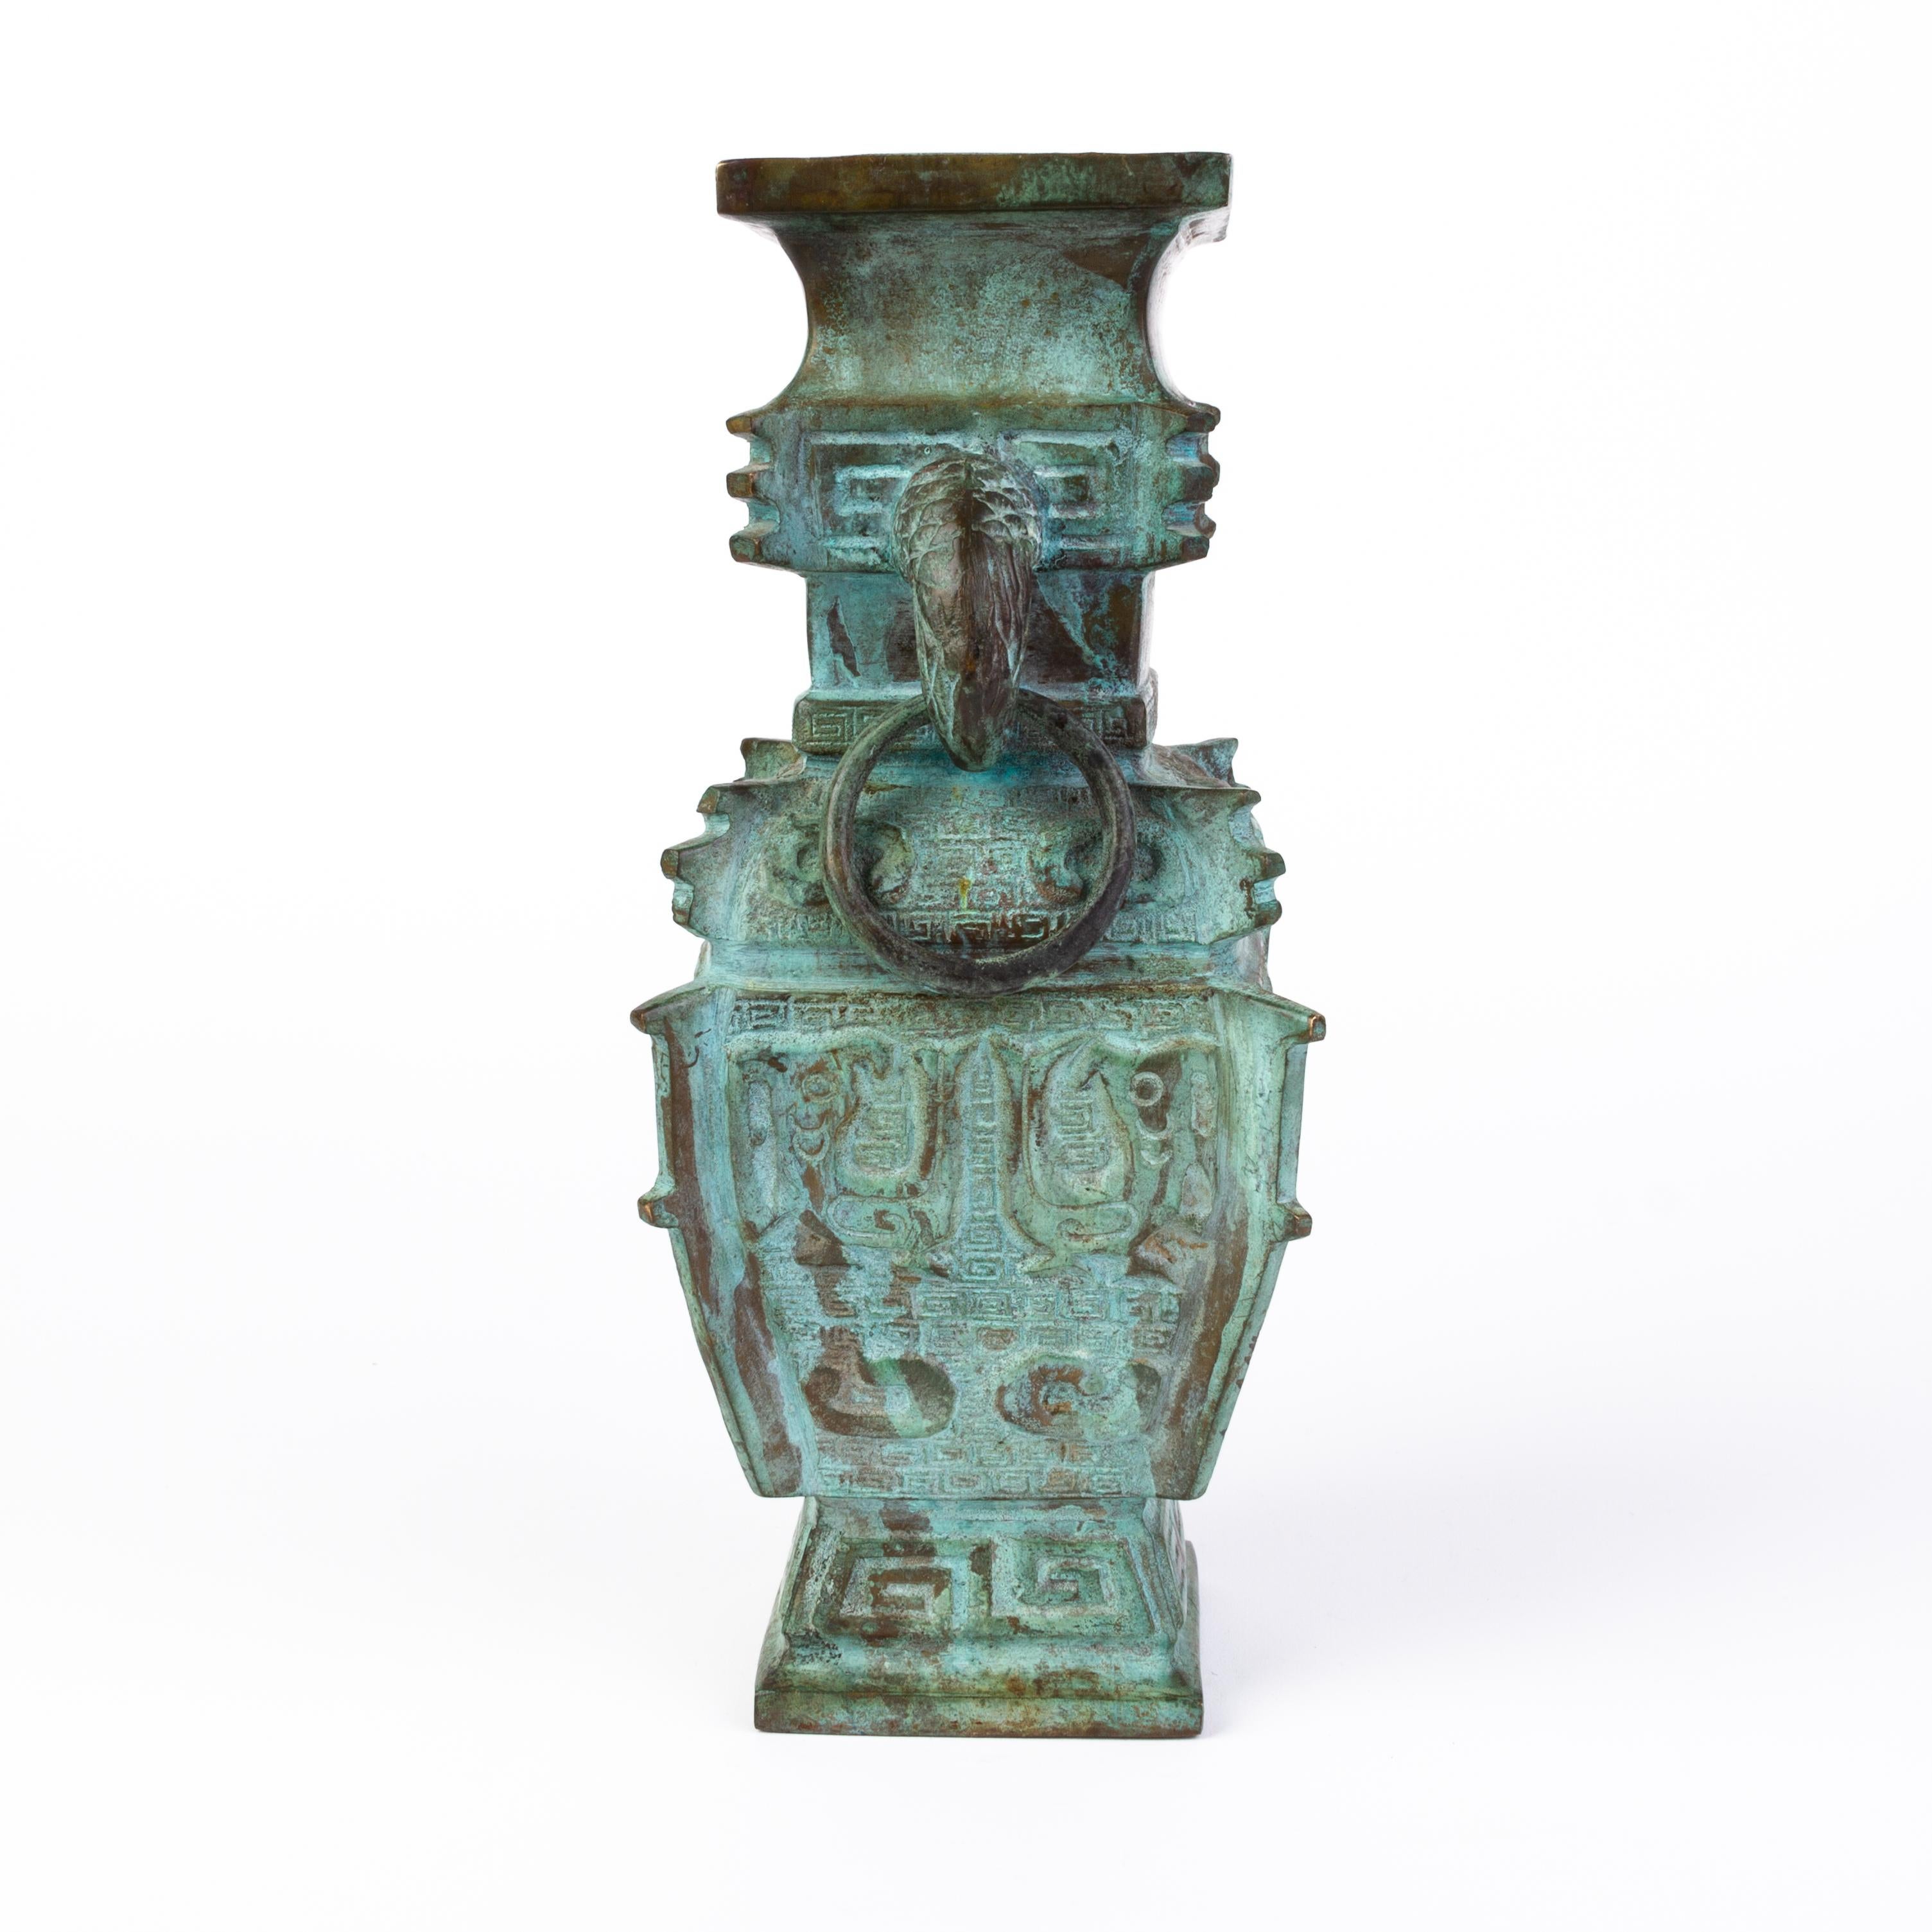 Early 20th century Chinese archaist vase, bronze.
From a private collection.
Free international shipping.